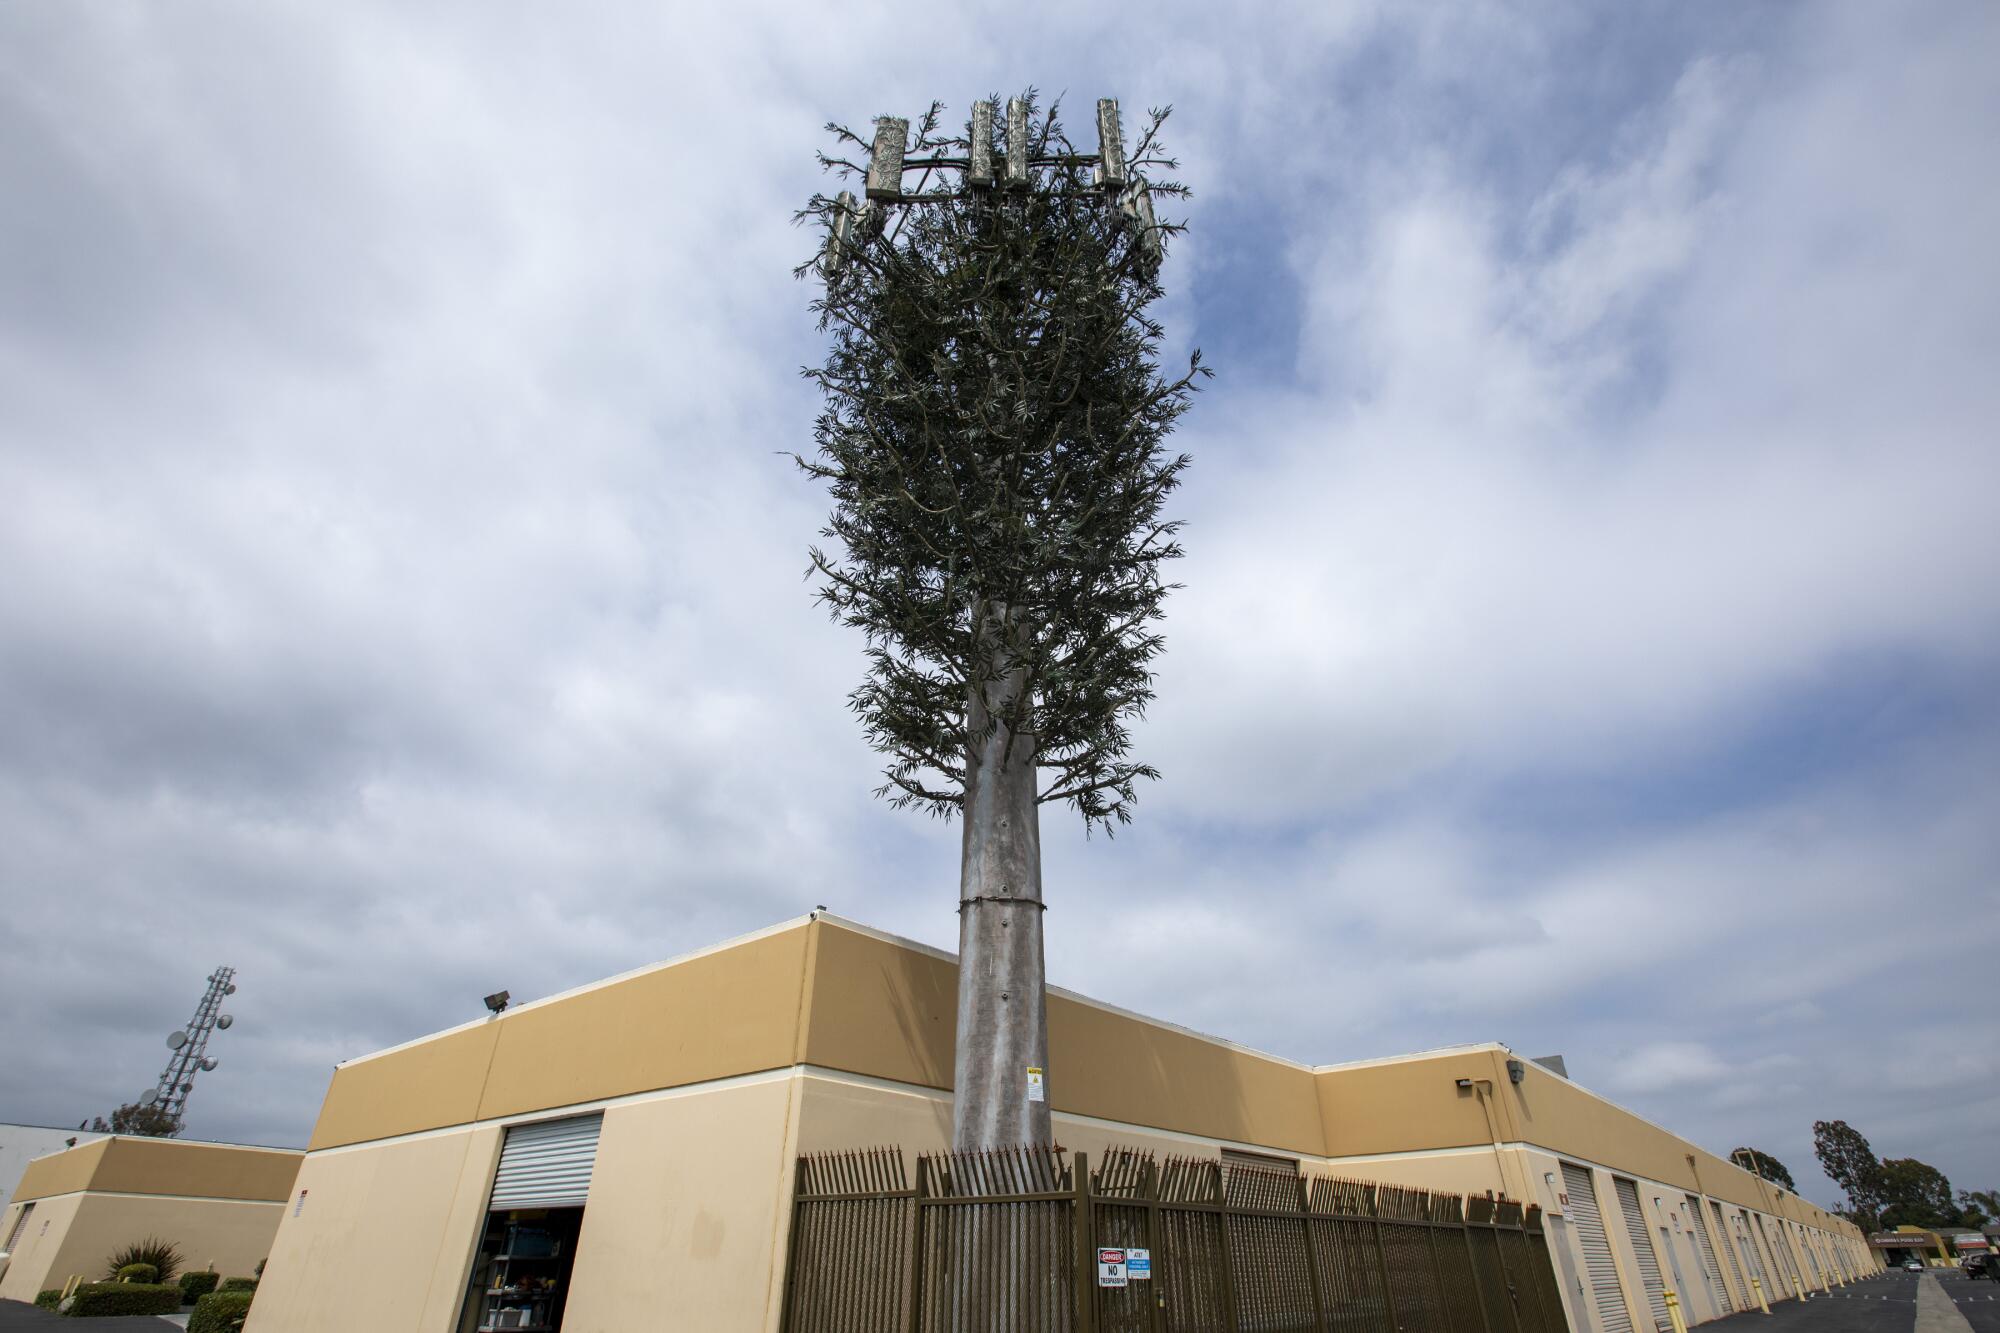 An image of a cell tower designed to look like a eucalyptus tree.